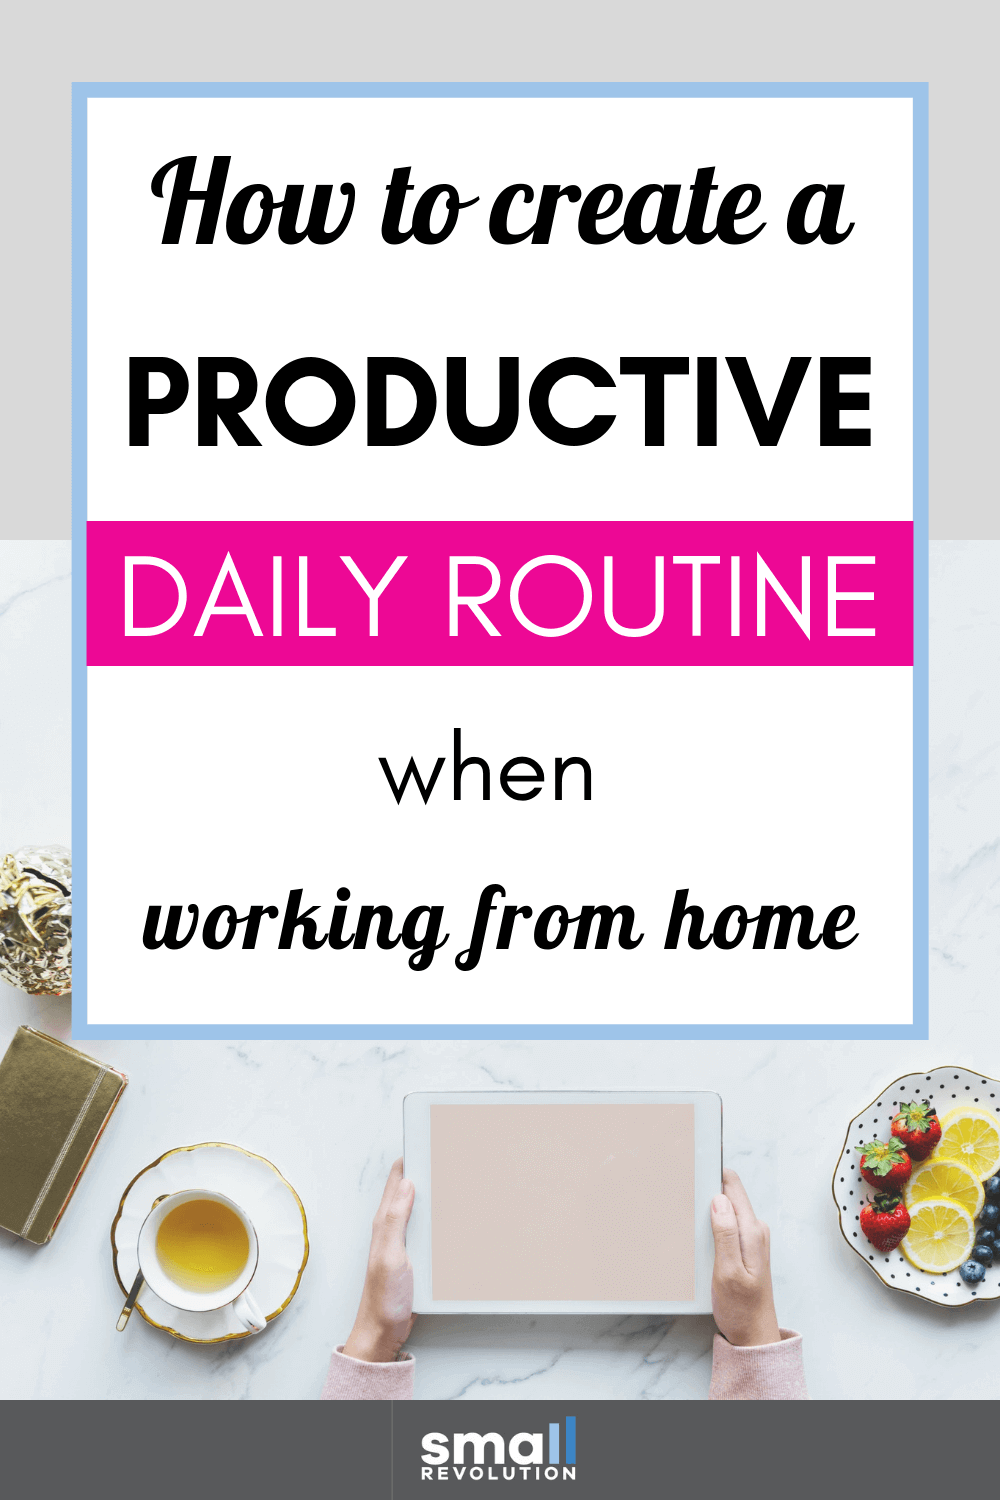 How to create a productive daily routine when working from home